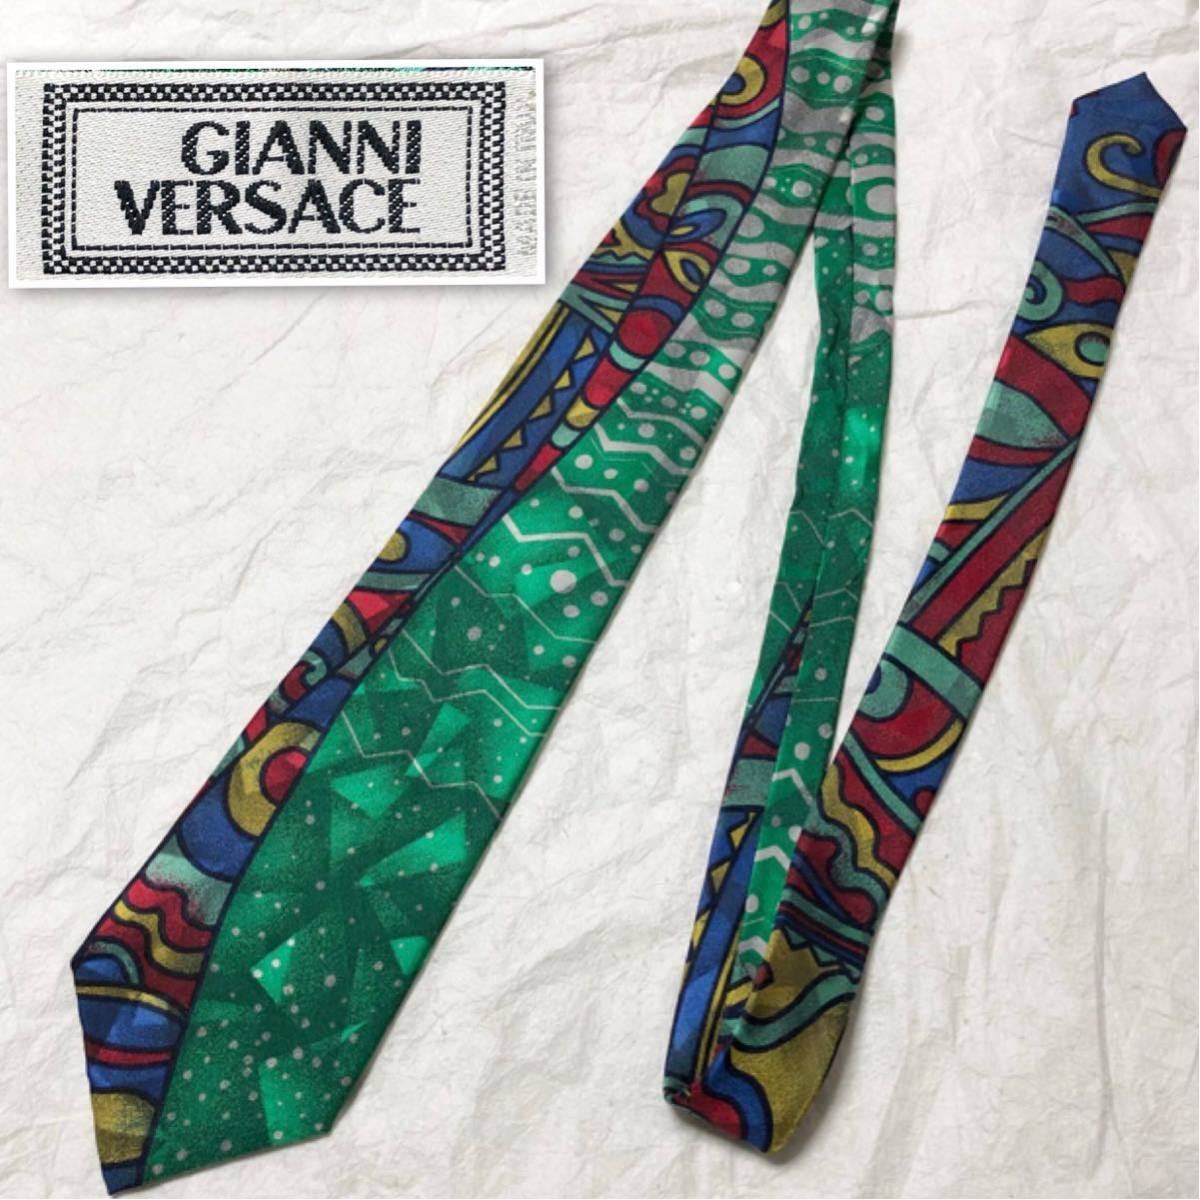 # beautiful goods #GIANNI VERSACE Gianni Versace necktie present-day fine art manner total pattern silk 100% Italy made multicolor 